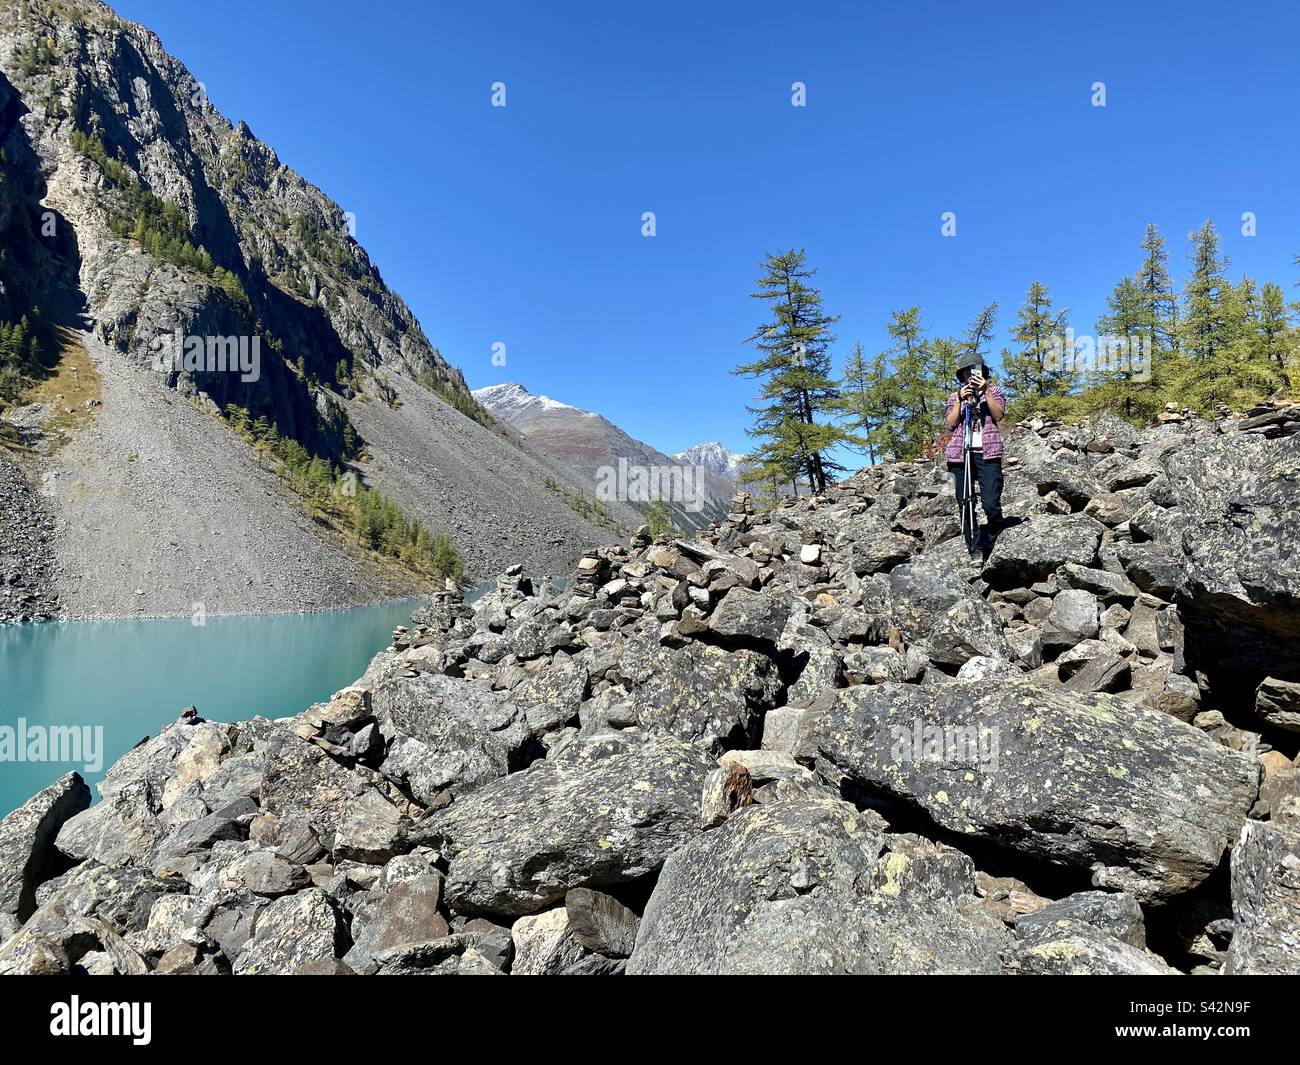 A girl traveler takes pictures on her phone of large stones at an alpine lake among the mountains in the Altai in Russia. Stock Photo